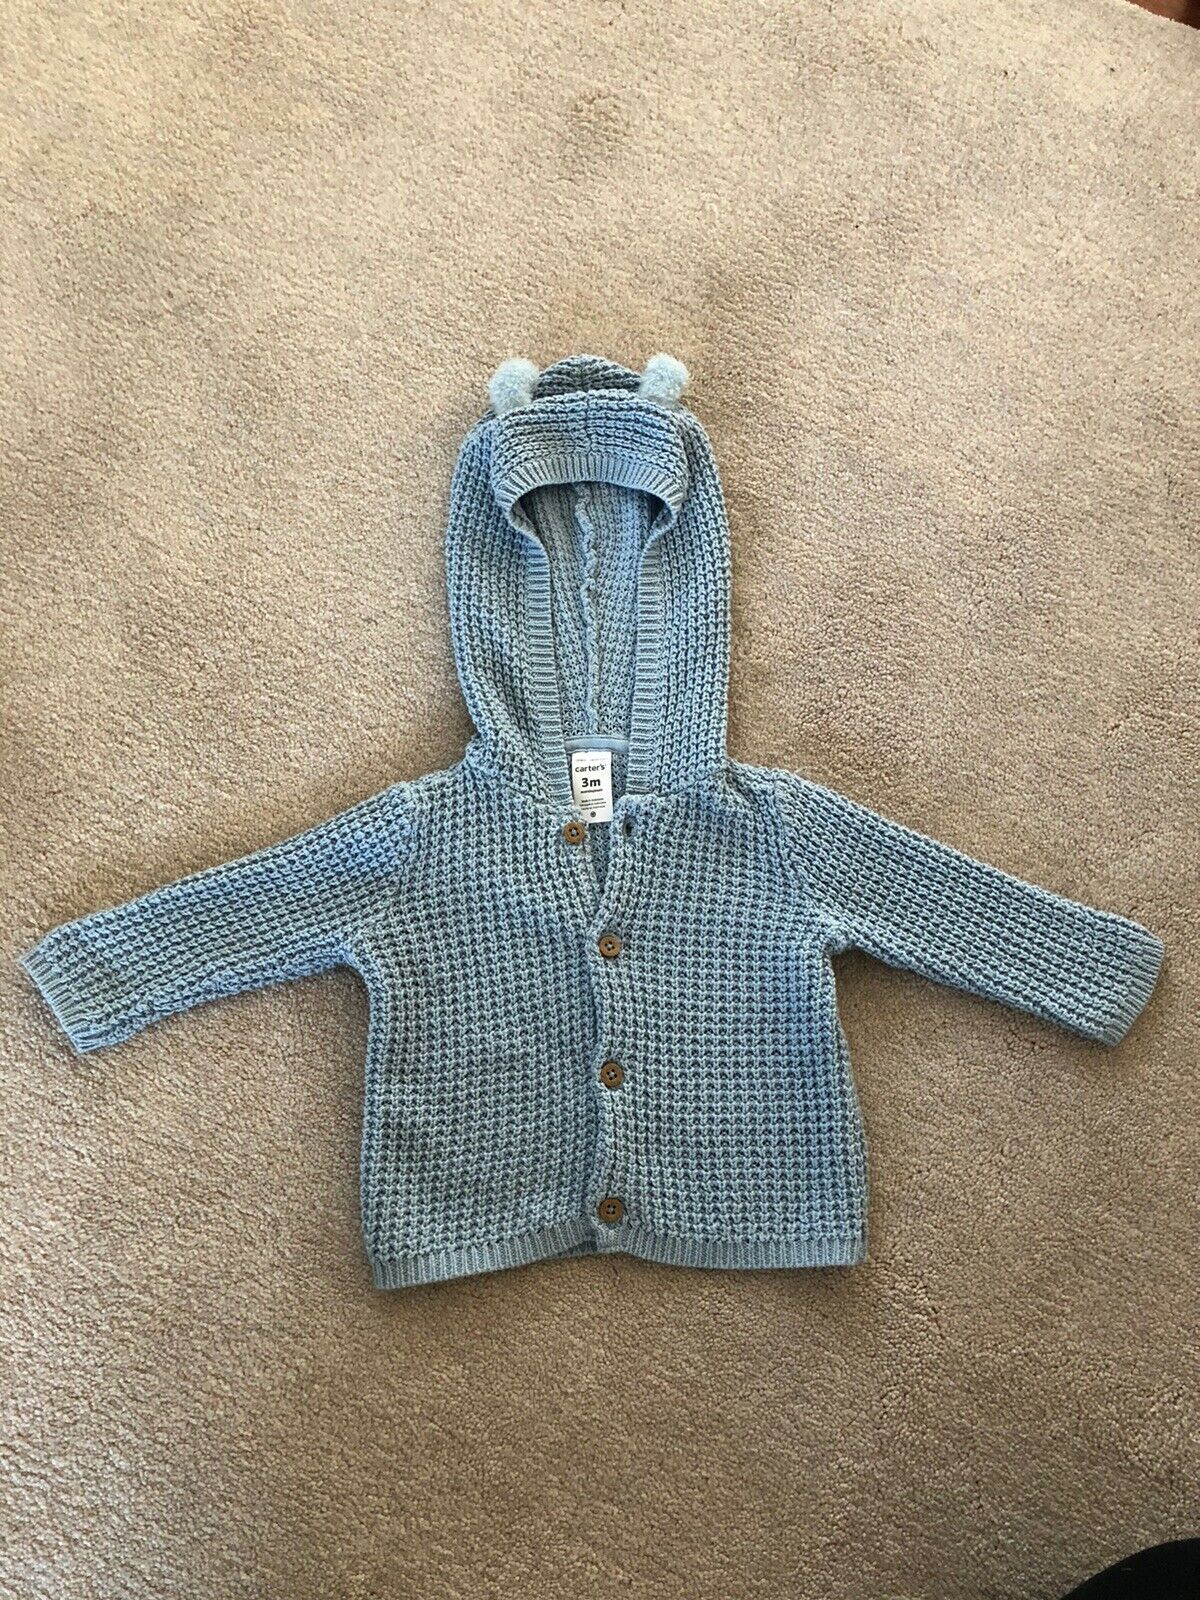 Carters Baby Sweater Size 3 Months